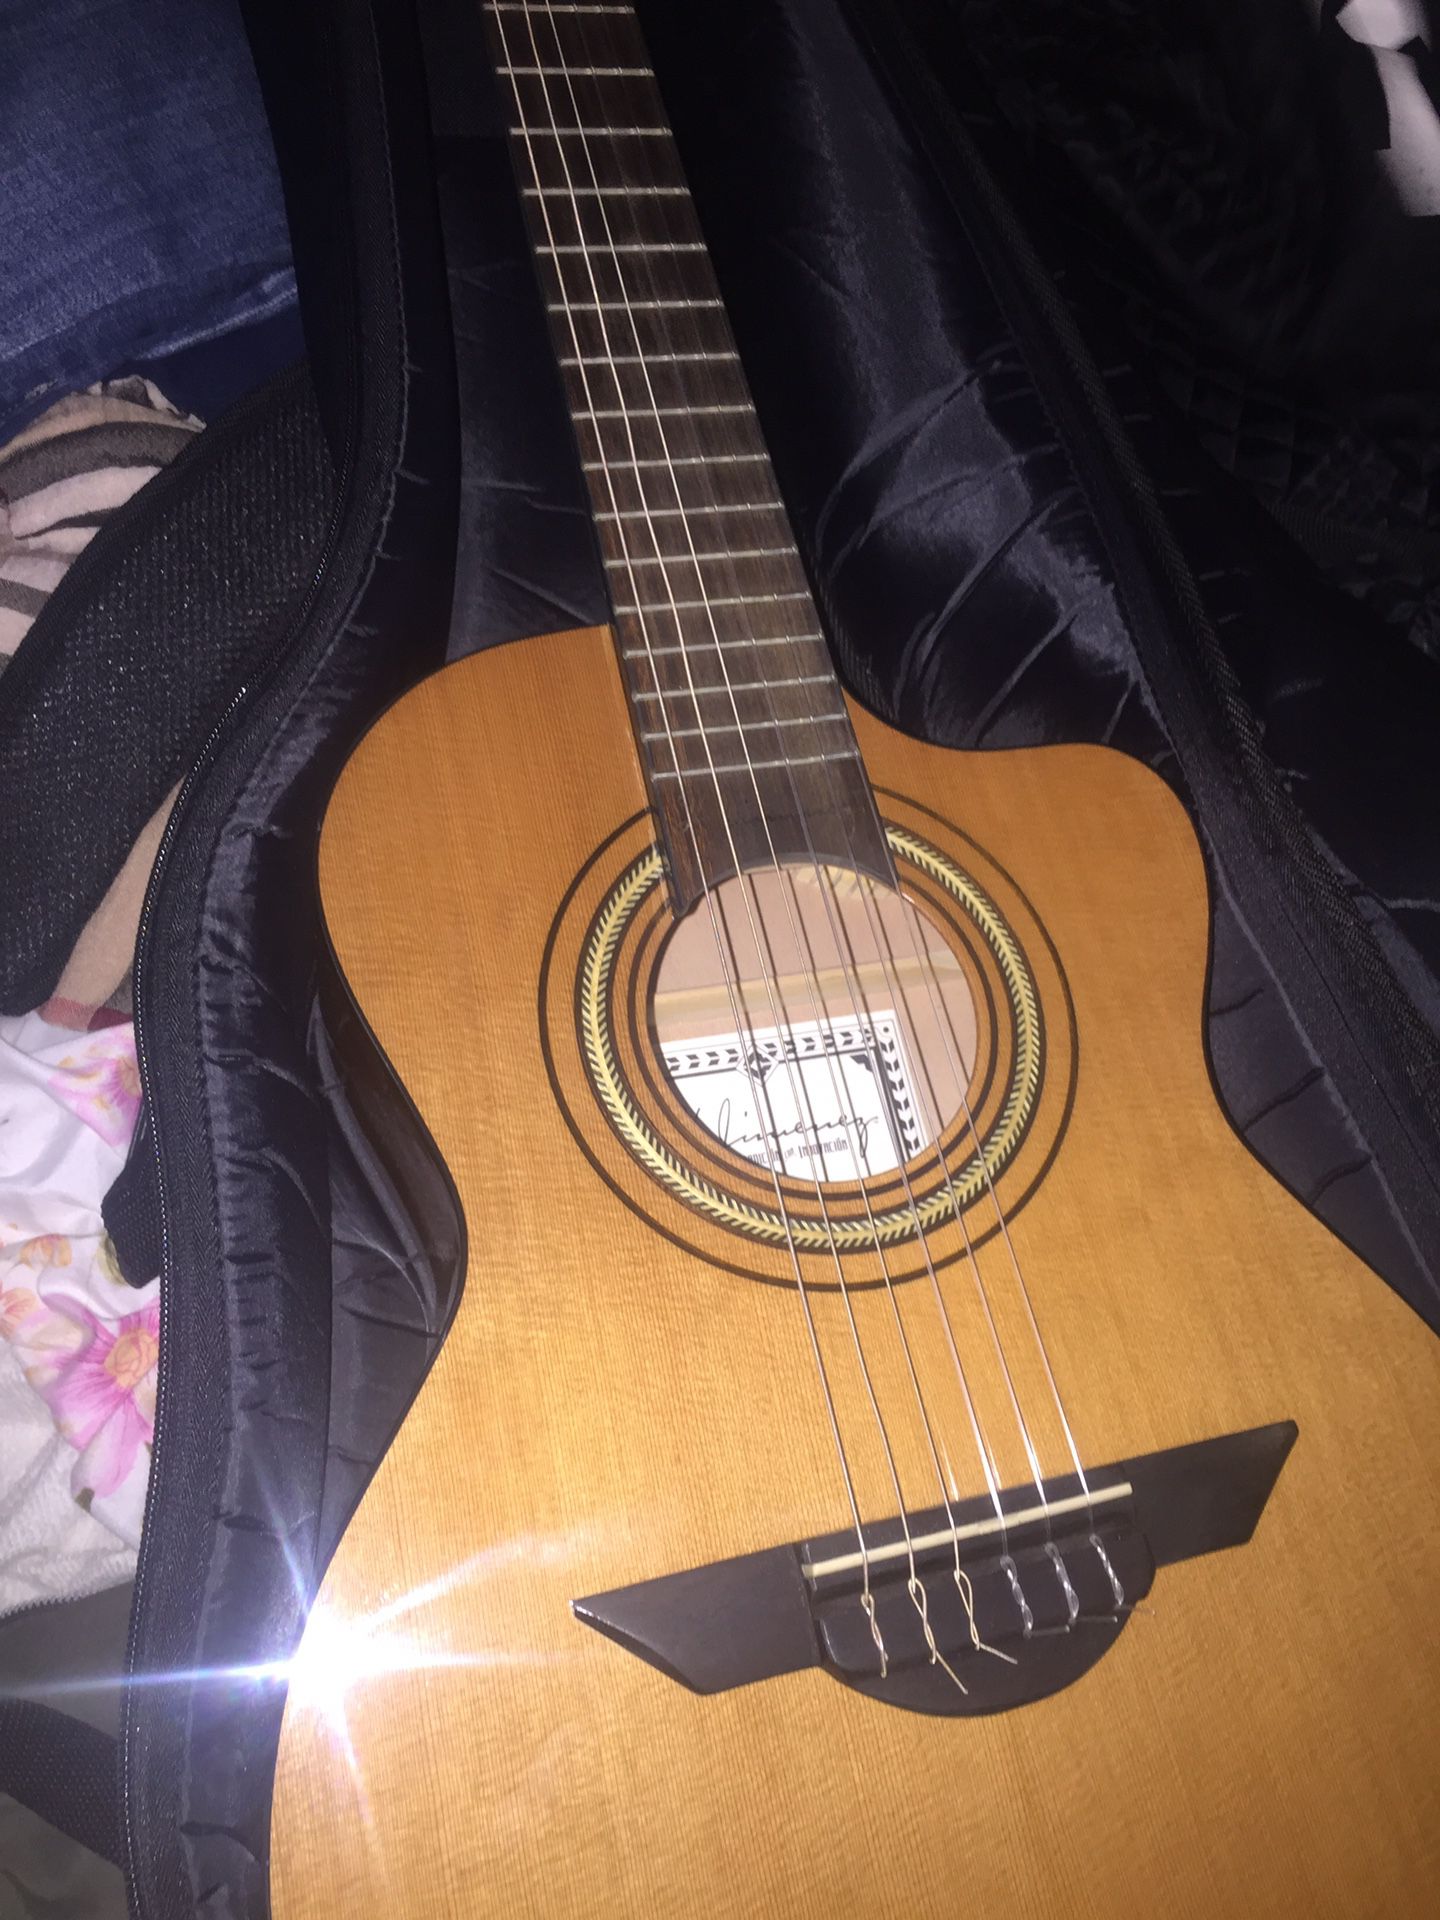 Acustic guitar please offer up!